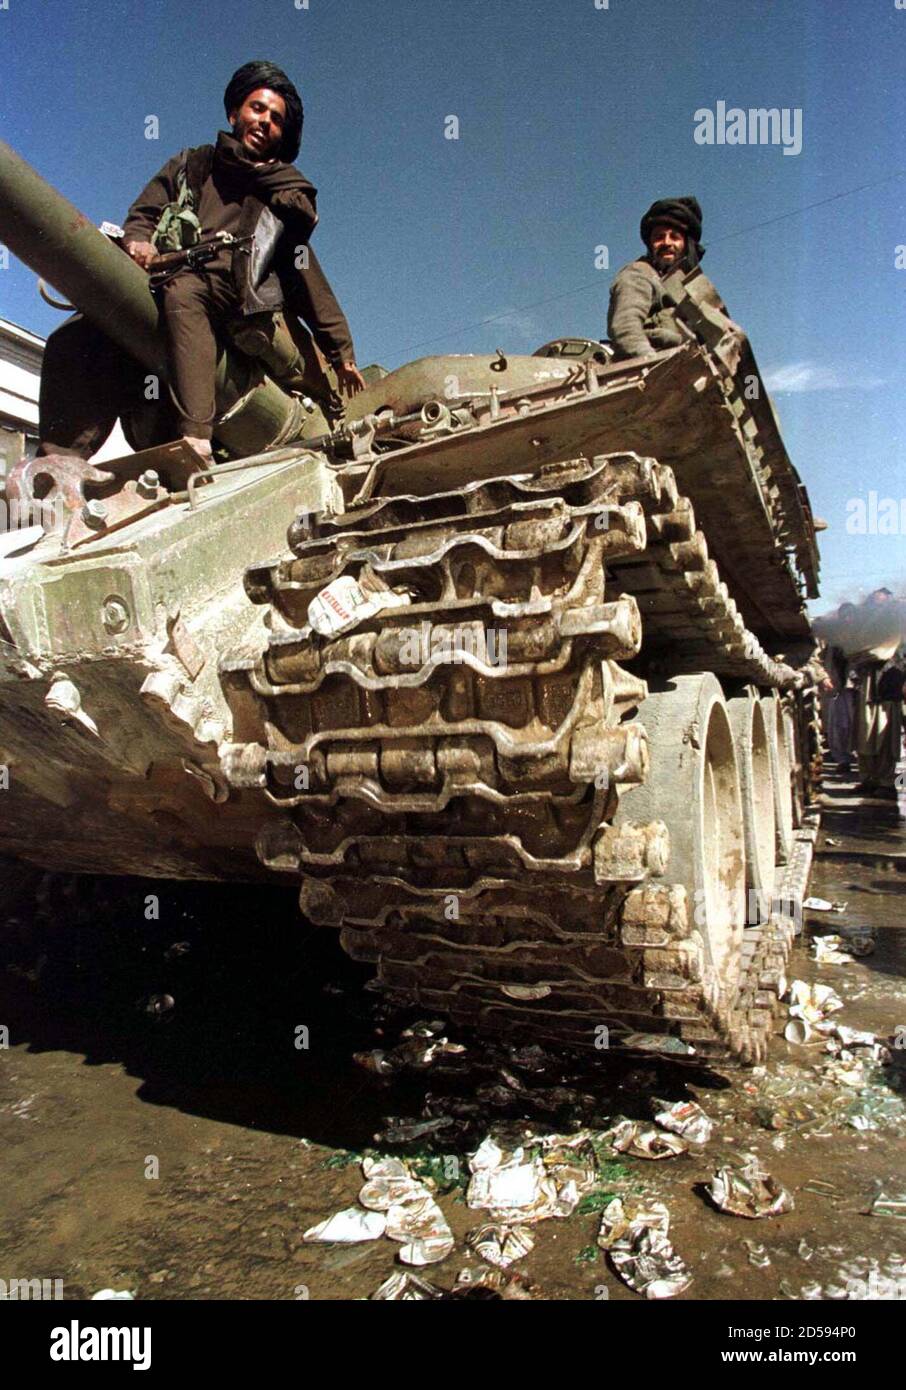 Afghanistan's purist Islamic Taliban fighters laugh from their battle tank as they crush beer cans to demonstrate their loathing of alcohol October 24. The tank drove over the cans a dozen times, spraying beer over bystanders. The Taliban did not say where the beer had come from, saying only it had been seized. Stock Photo